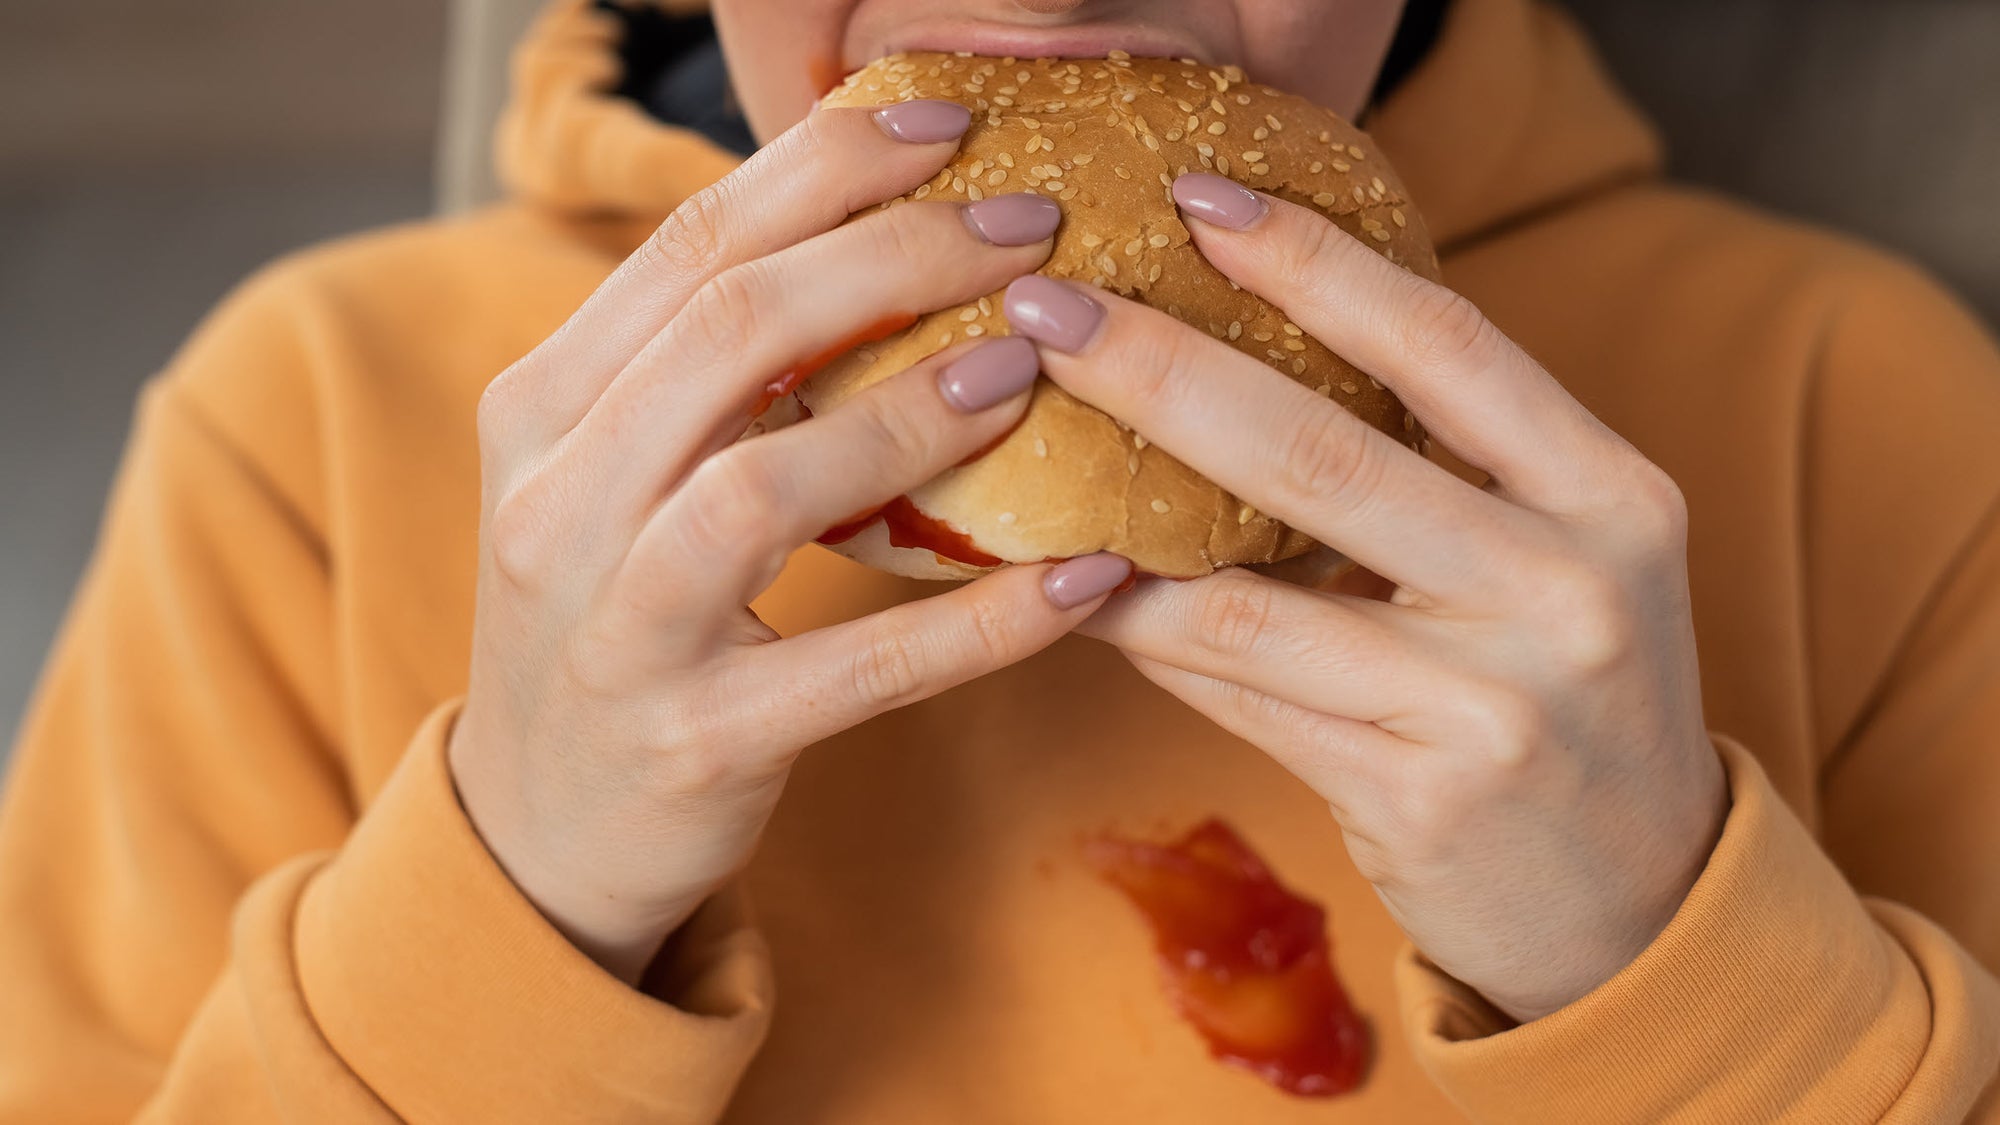 A Guide to Removing BBQ Sauce Stains